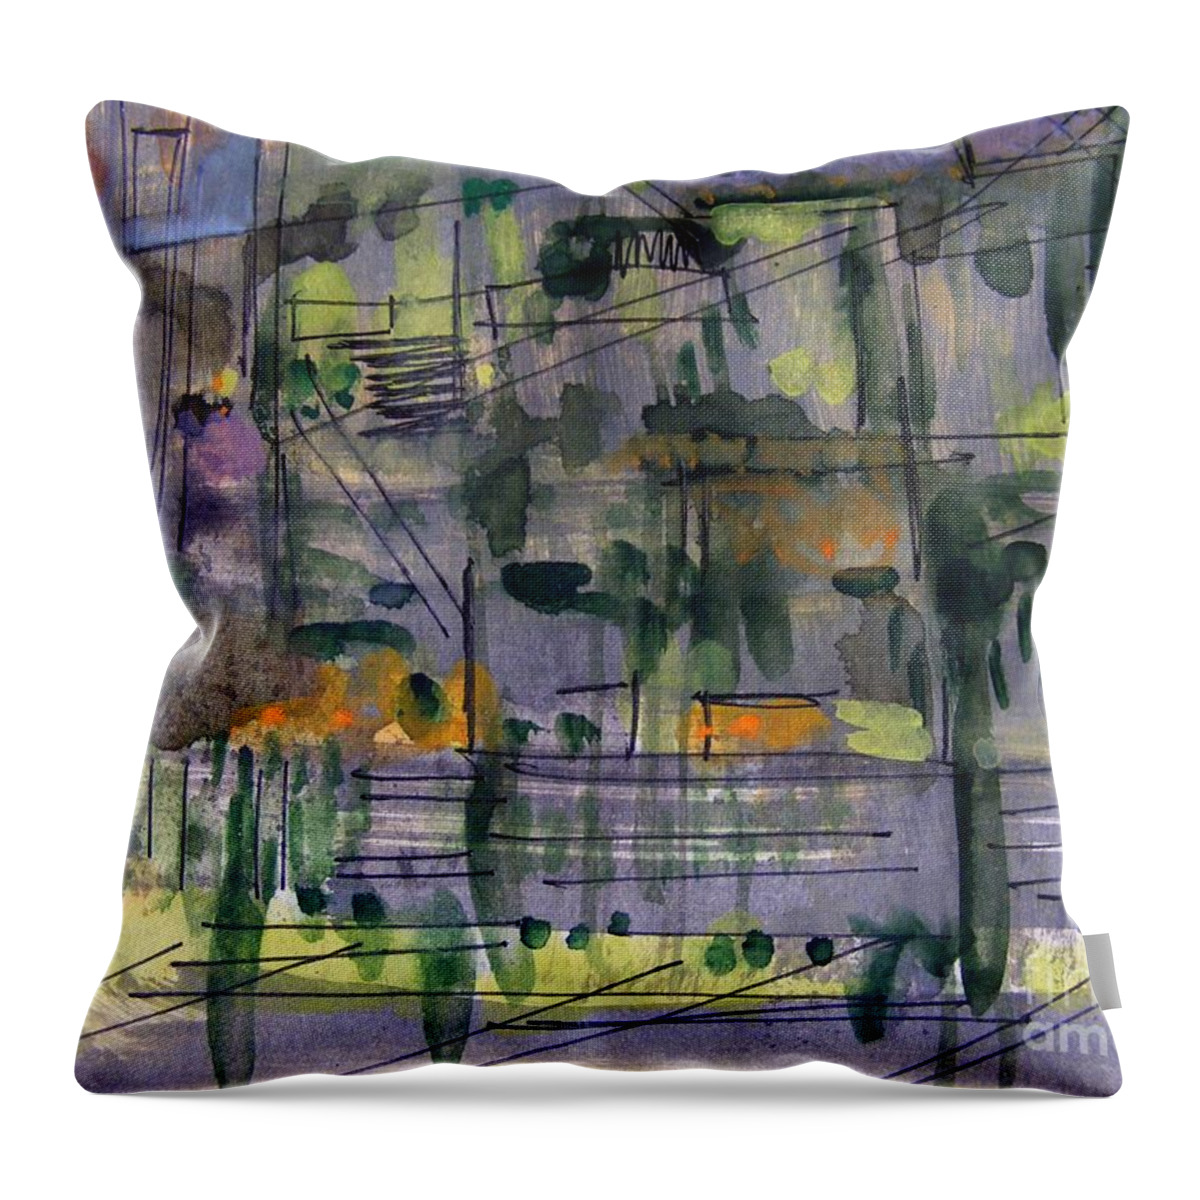 Abstract Gouache Landscape Throw Pillow featuring the painting Suburbs 2 by Nancy Kane Chapman